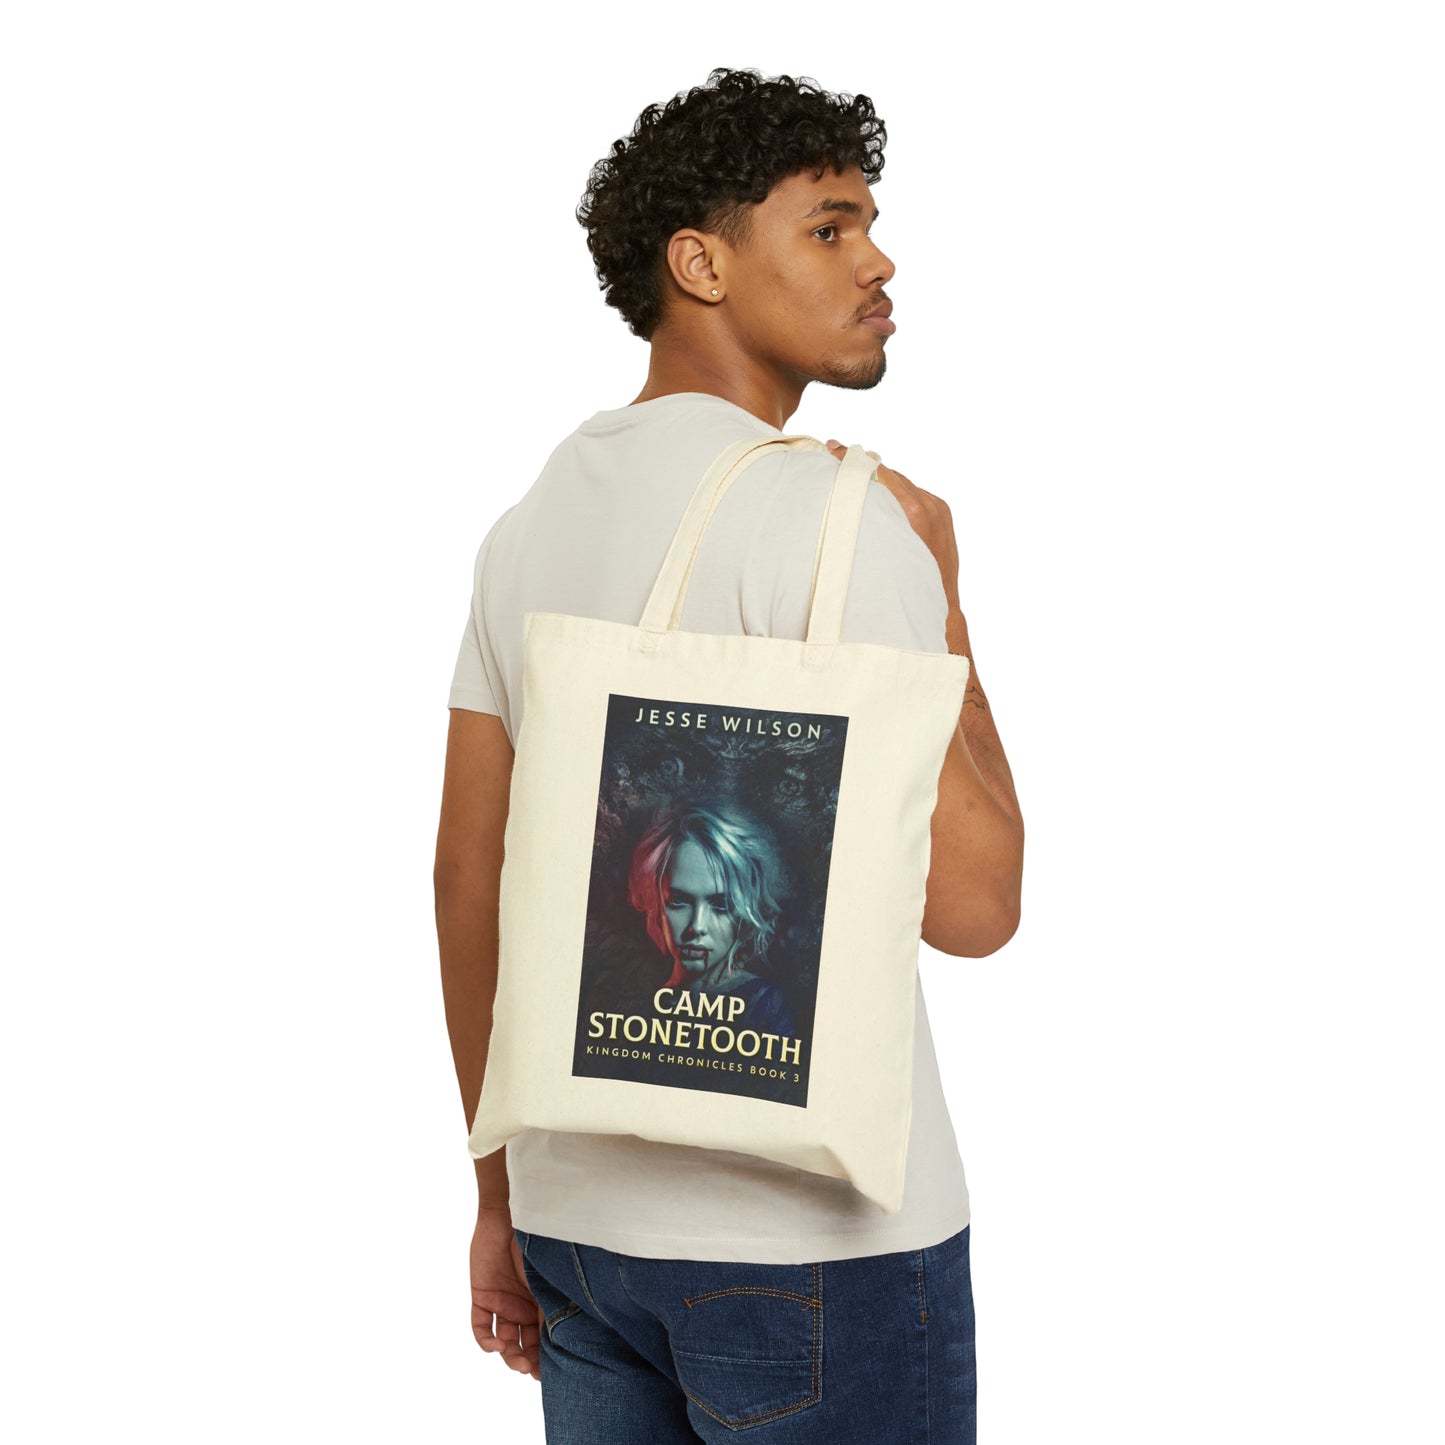 Camp Stonetooth - Cotton Canvas Tote Bag